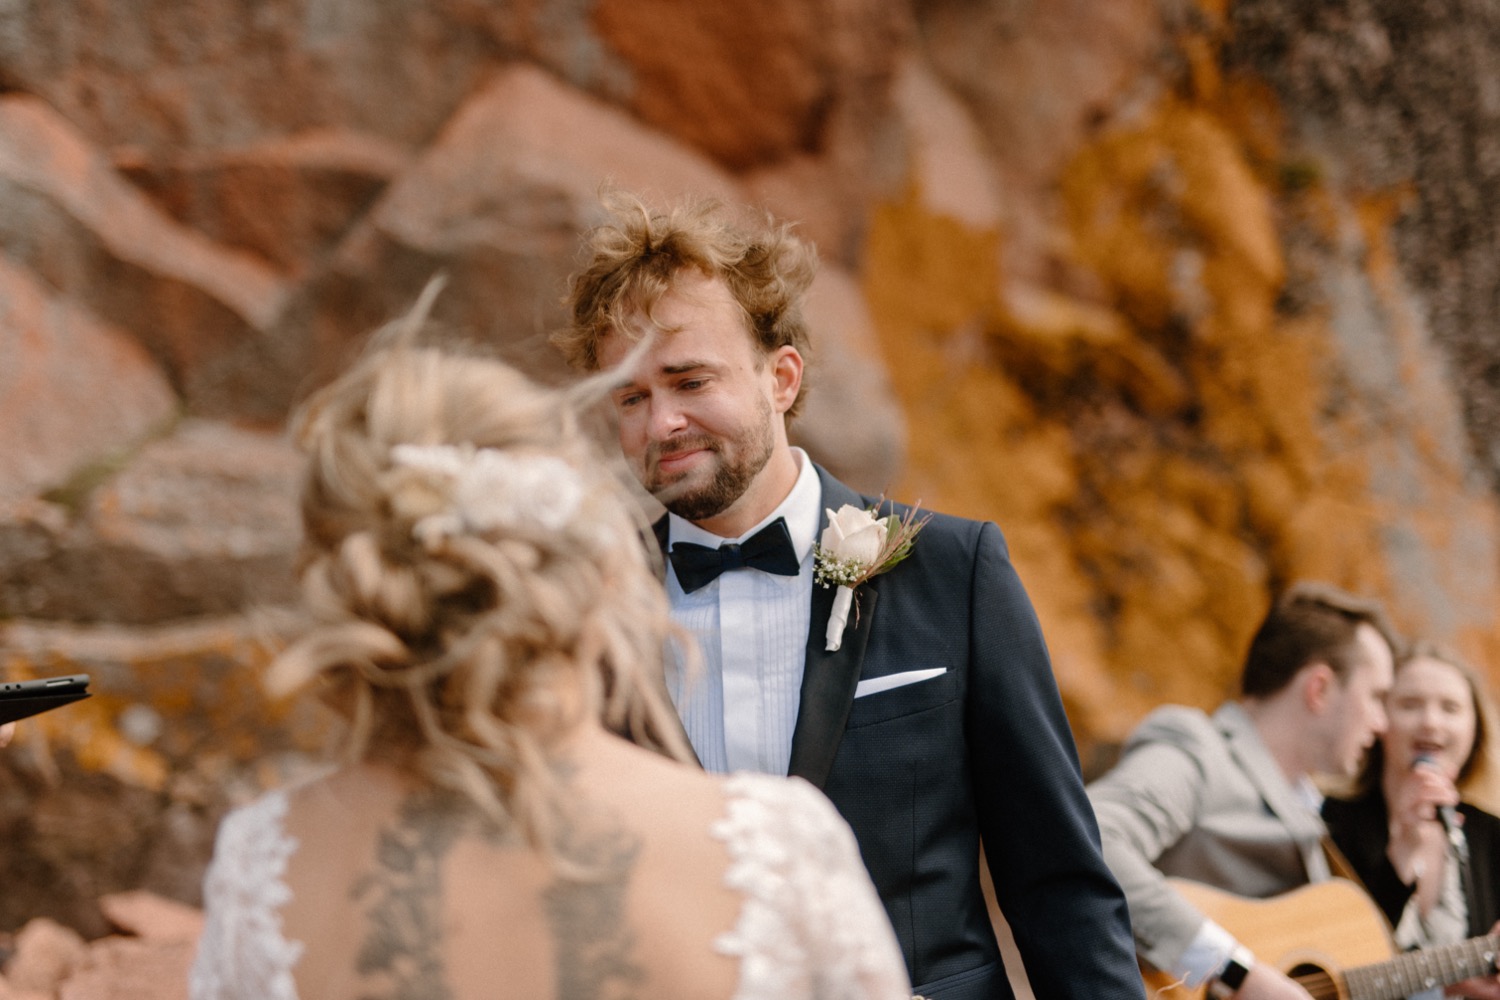 groom smiling at bride during intimate north shore wedding reception